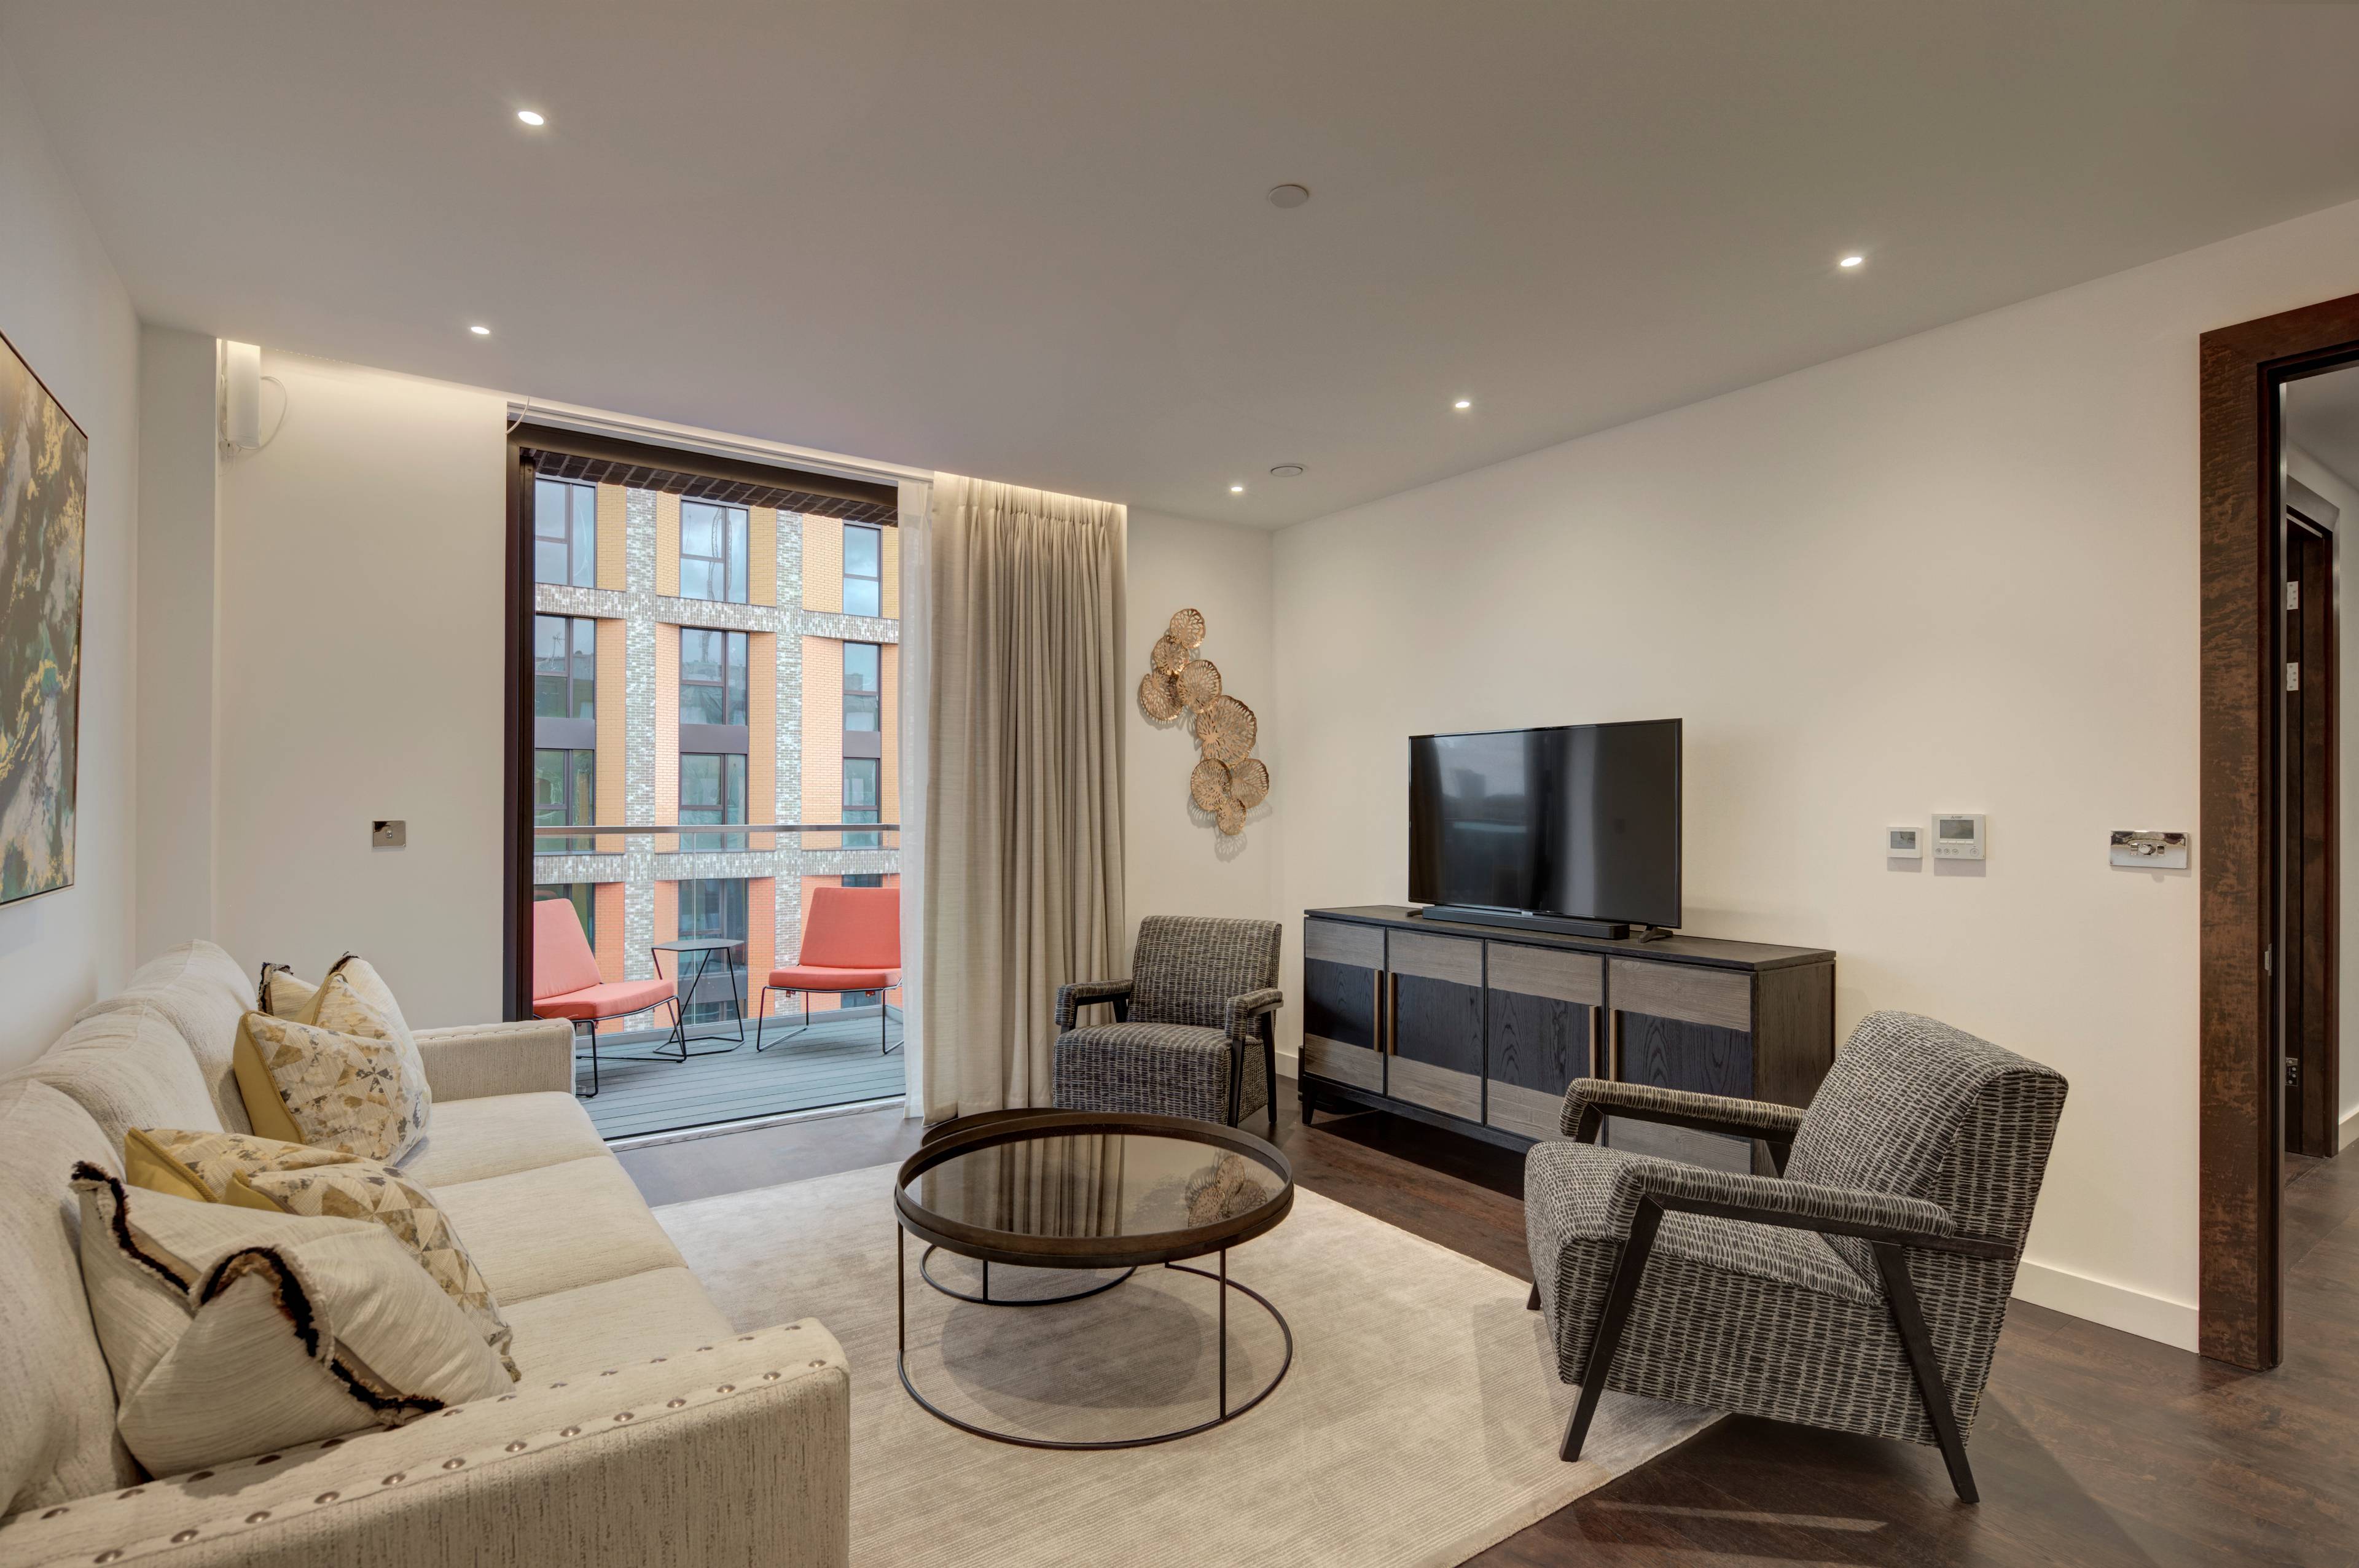 An impressive interior designed 1,123 Sq Ft three double-bedroom, two-bathroom air conditioned apartment located in Thornes House forming part of The Residence Collection in Nine Elms on London’s iconic South Bank.